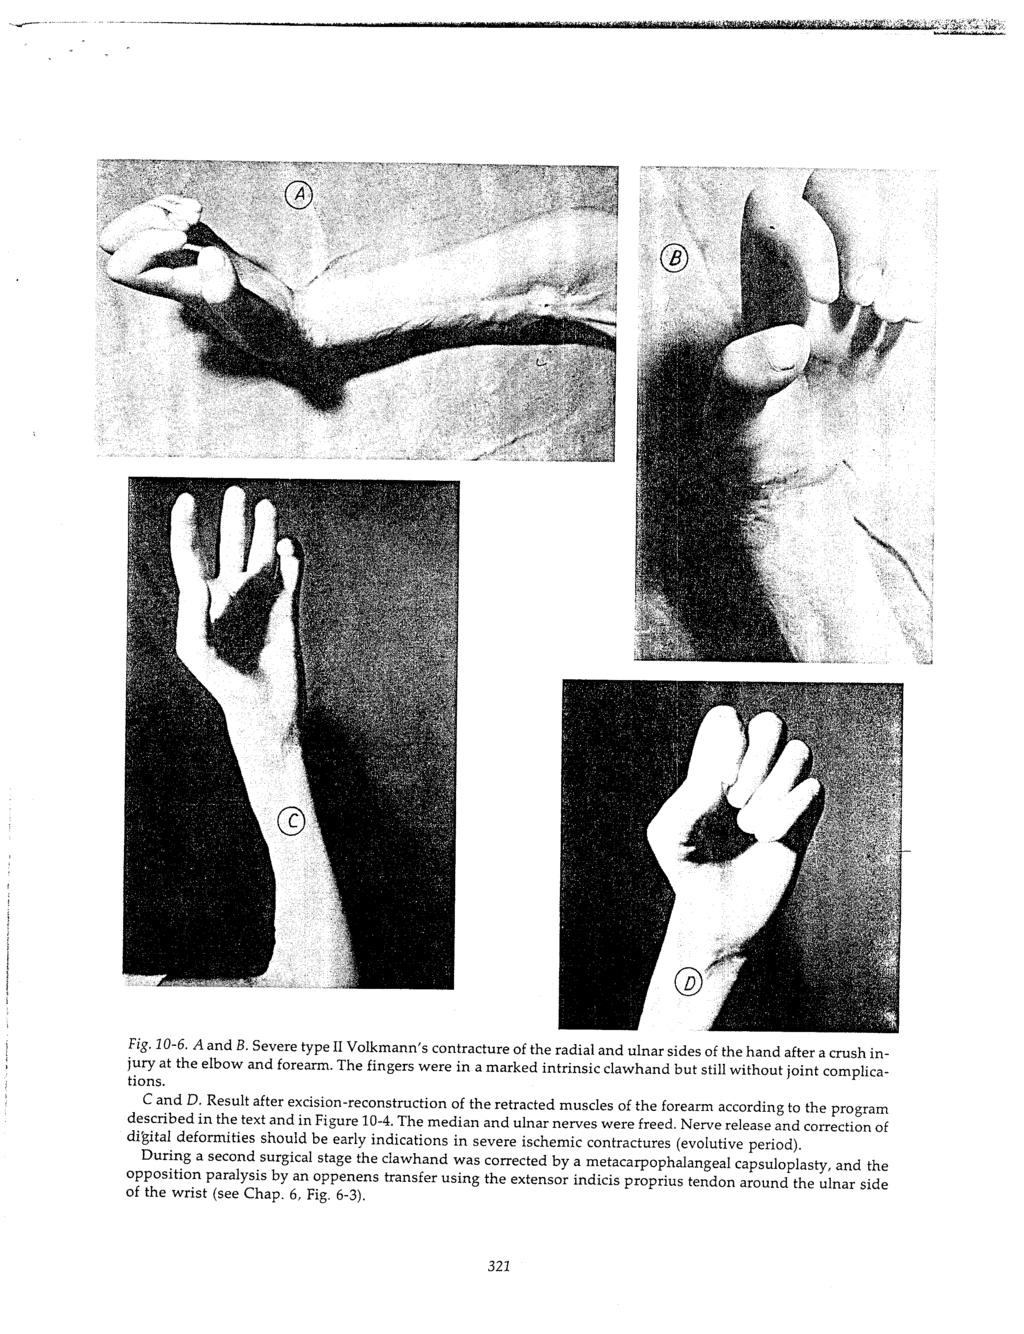 Fig. 10-6. A and B. Severe type II Volkmann s contracture of the radial and ulnar sides of the hand after a crush injury at the elbow and forearm.